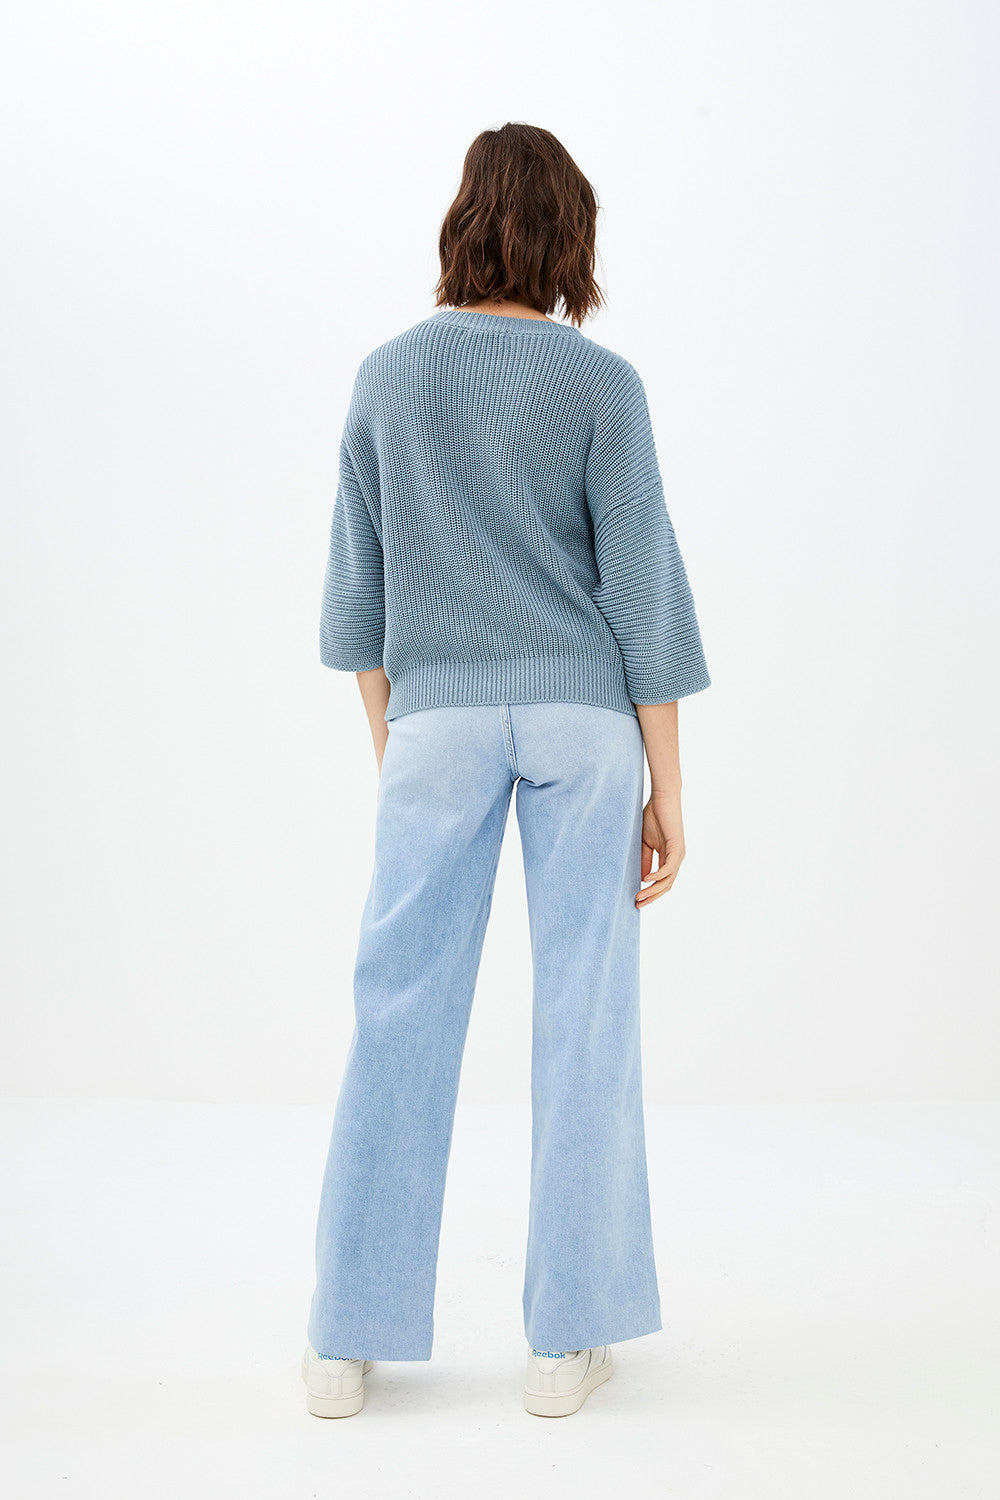 By-Bar - mayke pullover cloud blue